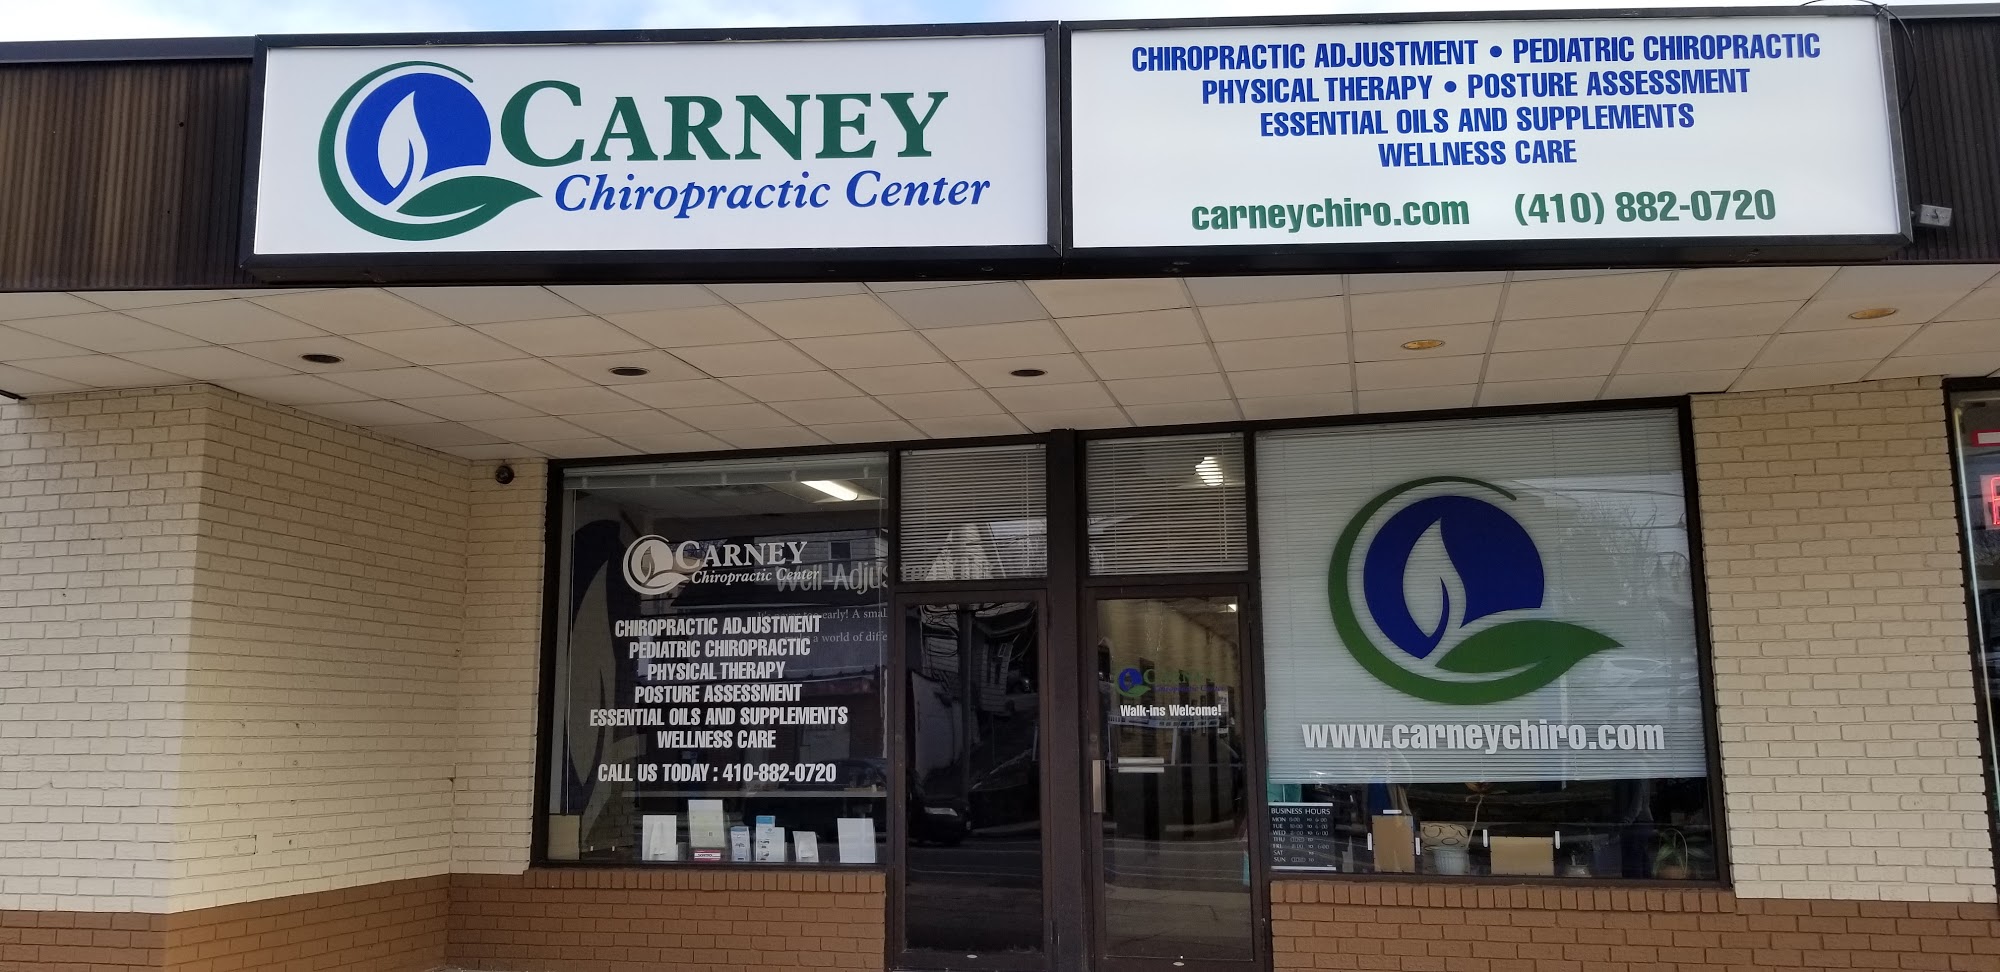 Carney Chiropractic Center